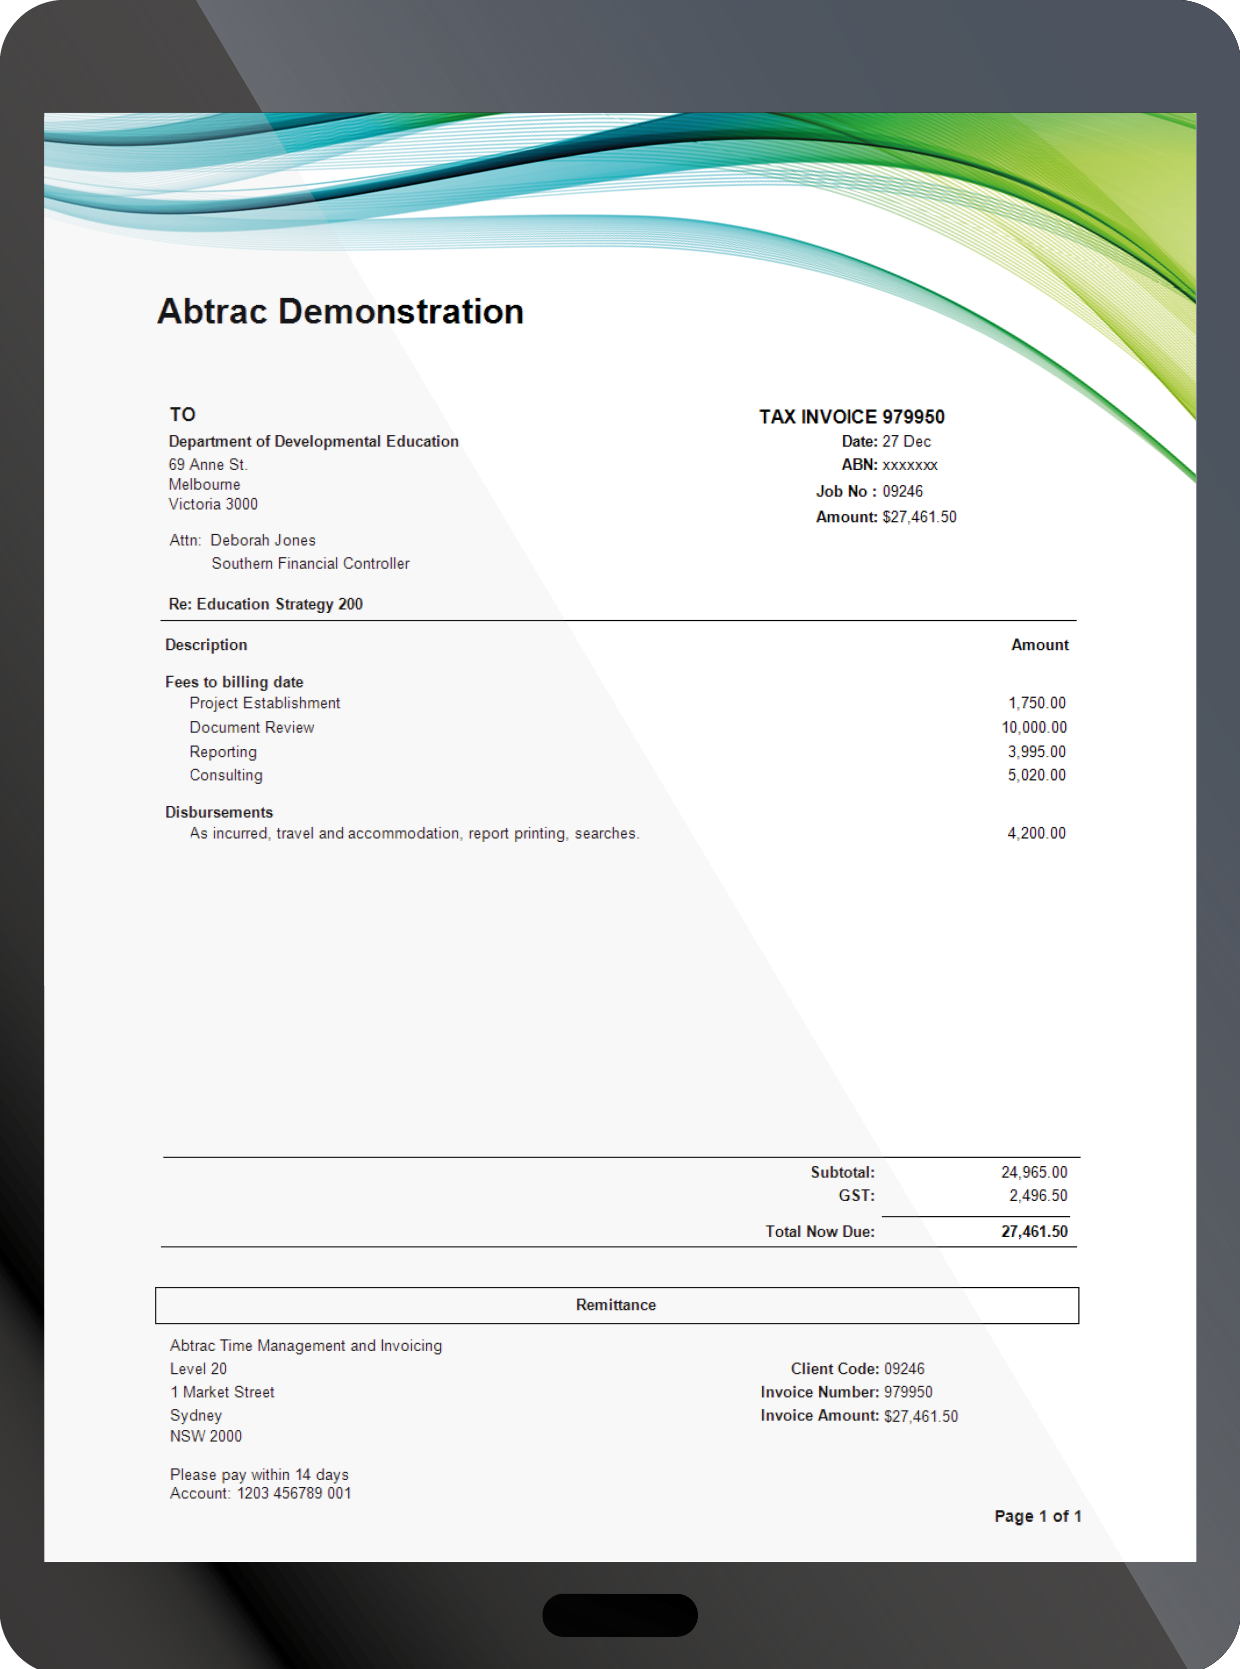 A simple invoice example